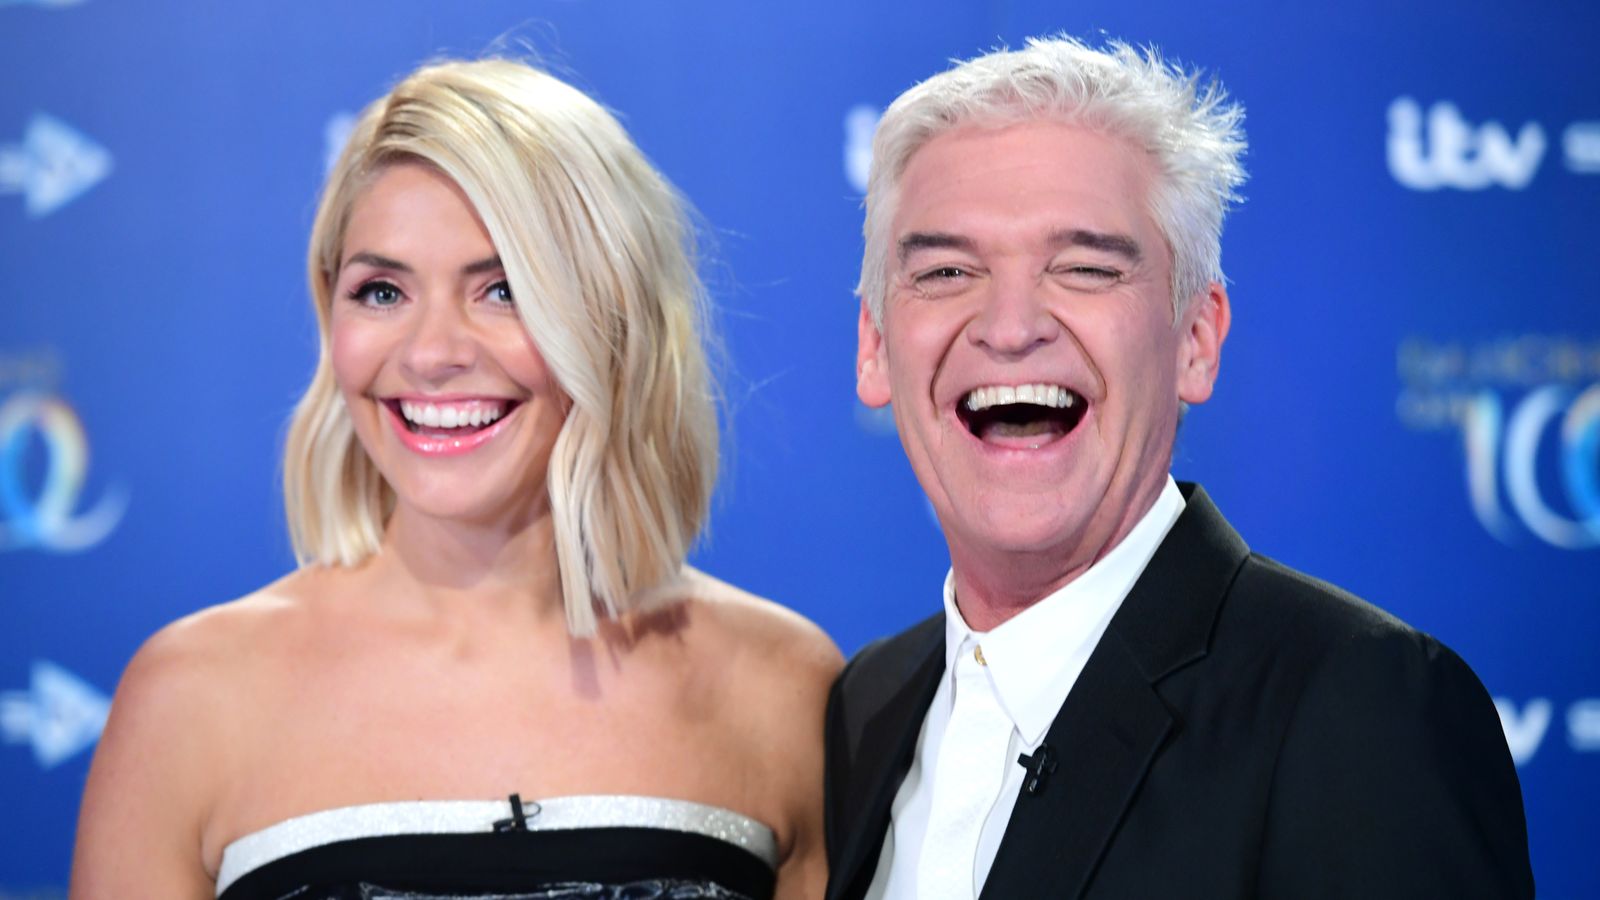 Phillip Schofield steps down from This Morning: His statement in full – and Holly Willoughby’s response | Ents & Arts News